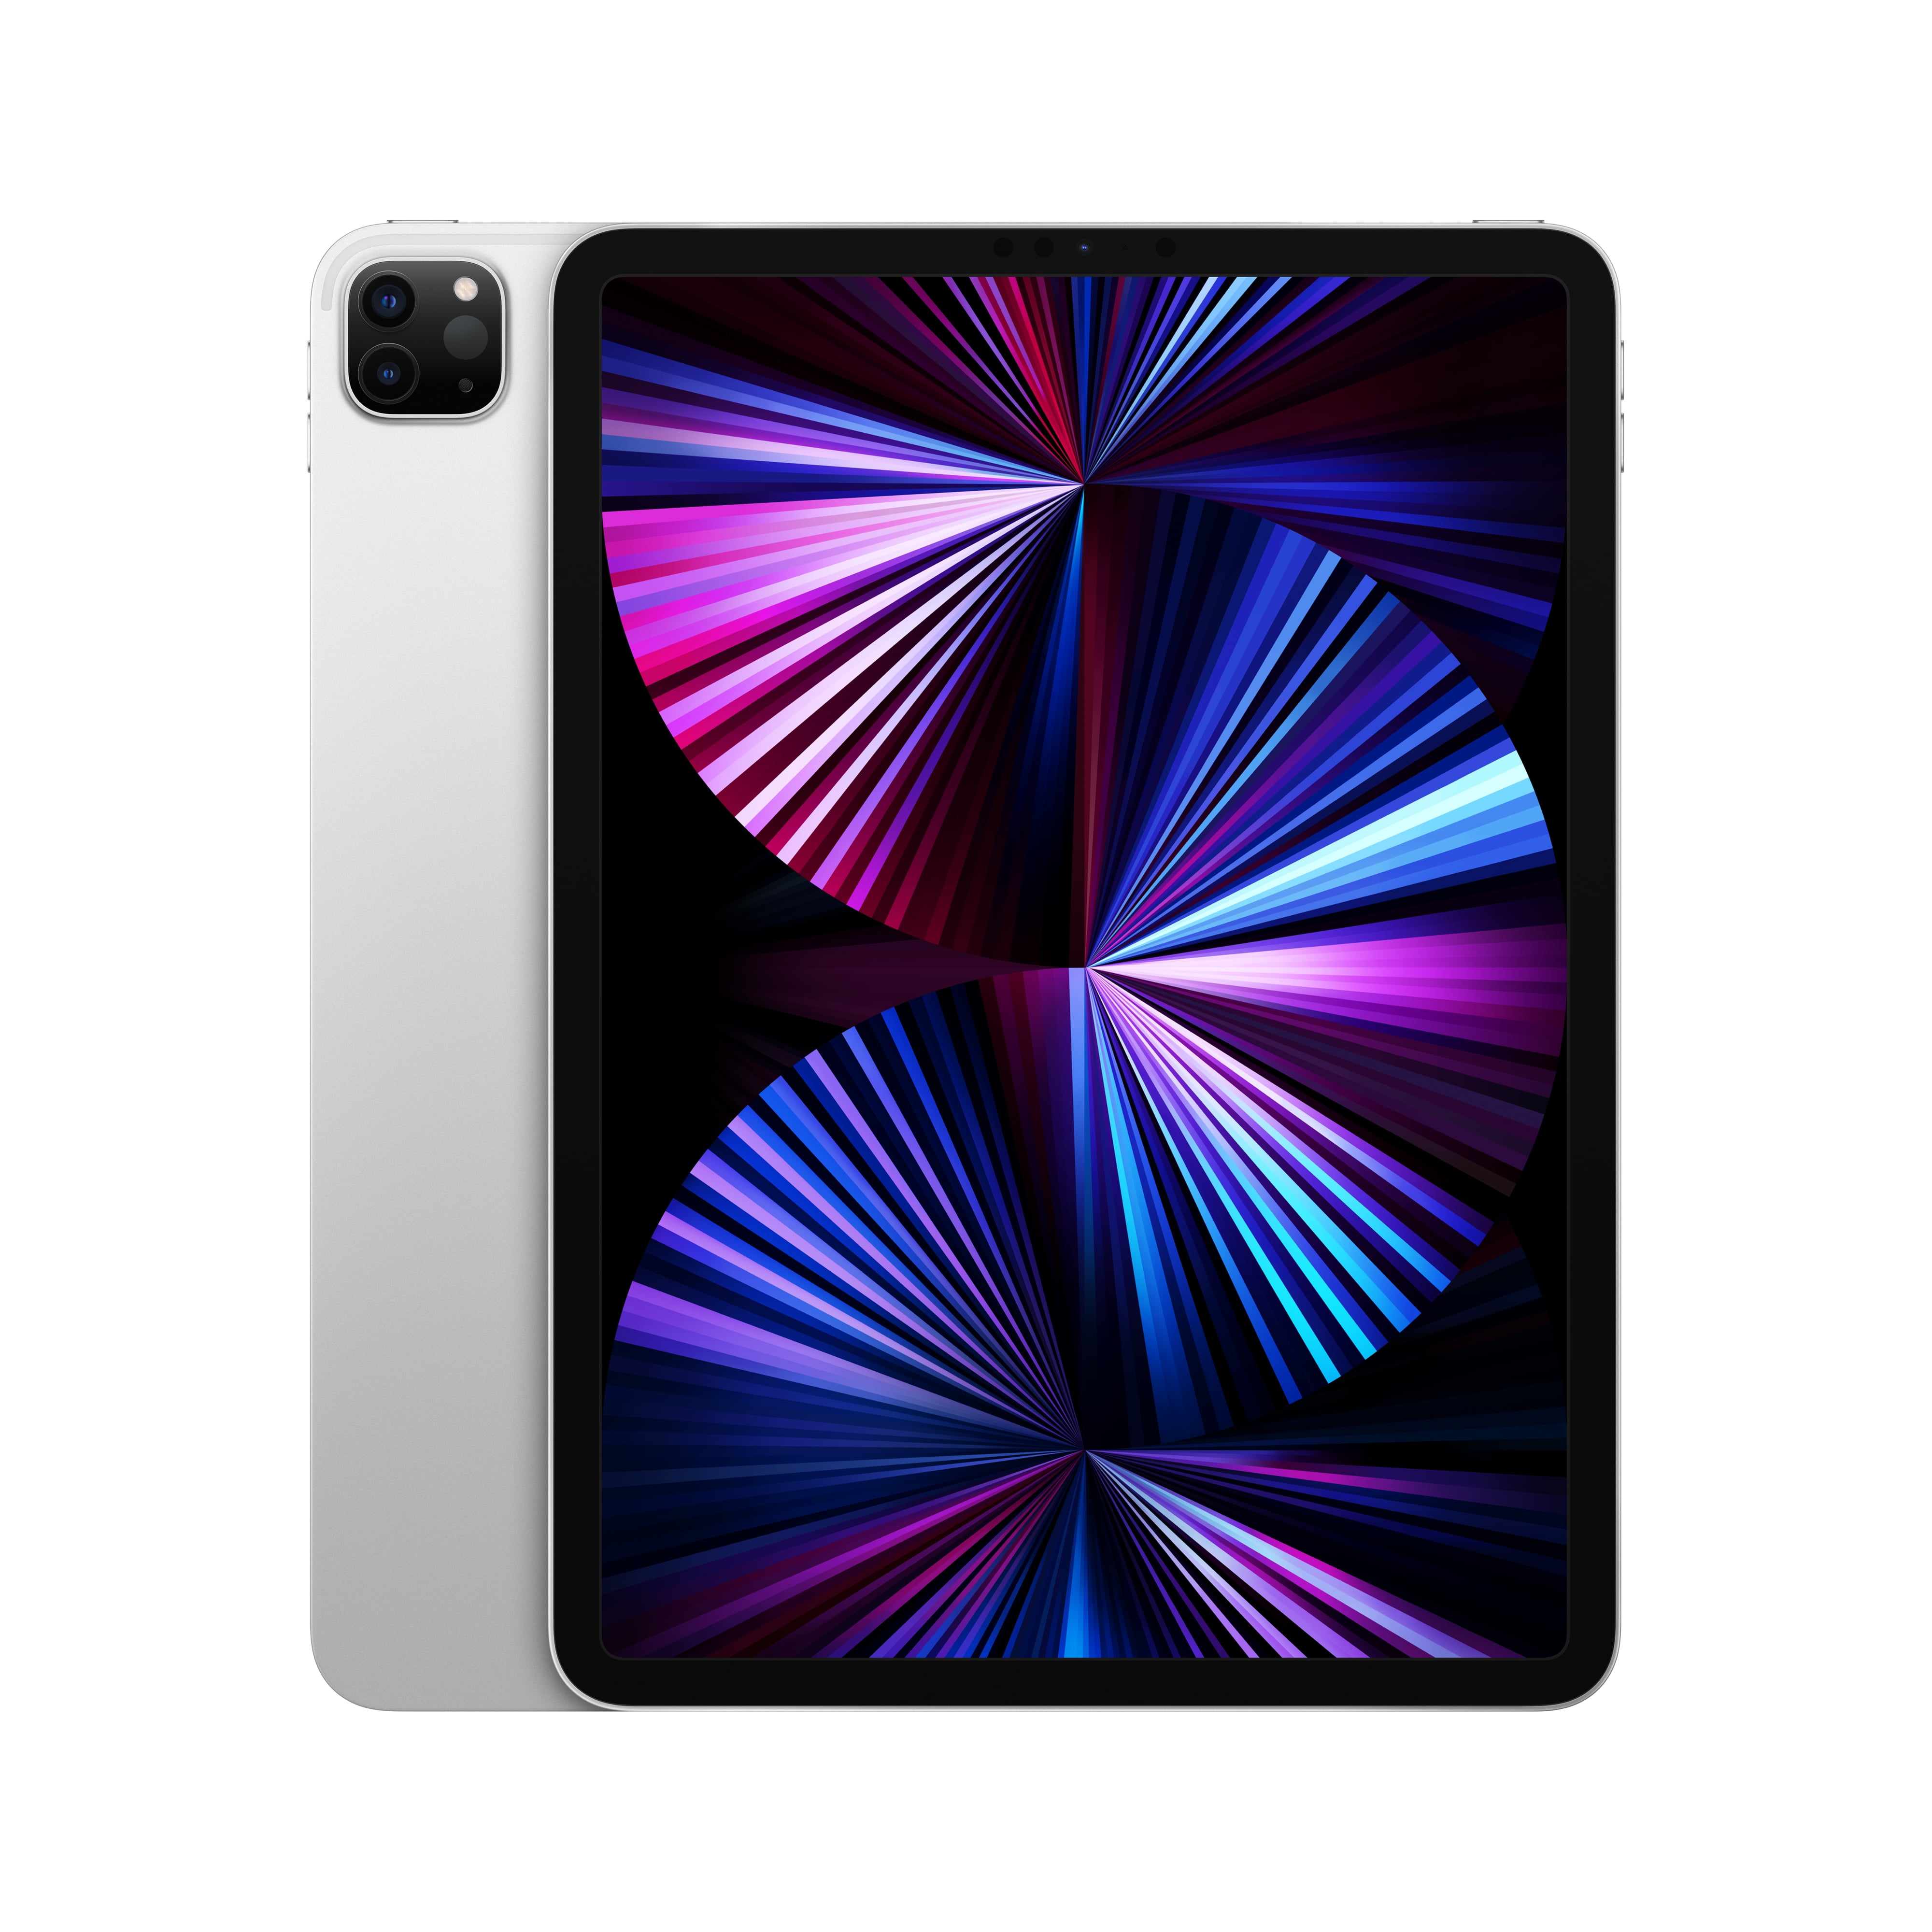 PC/タブレット タブレット 2021 Apple 11-inch iPad Pro Wi-Fi + Cellular 256GB - Silver (3rd Generation)